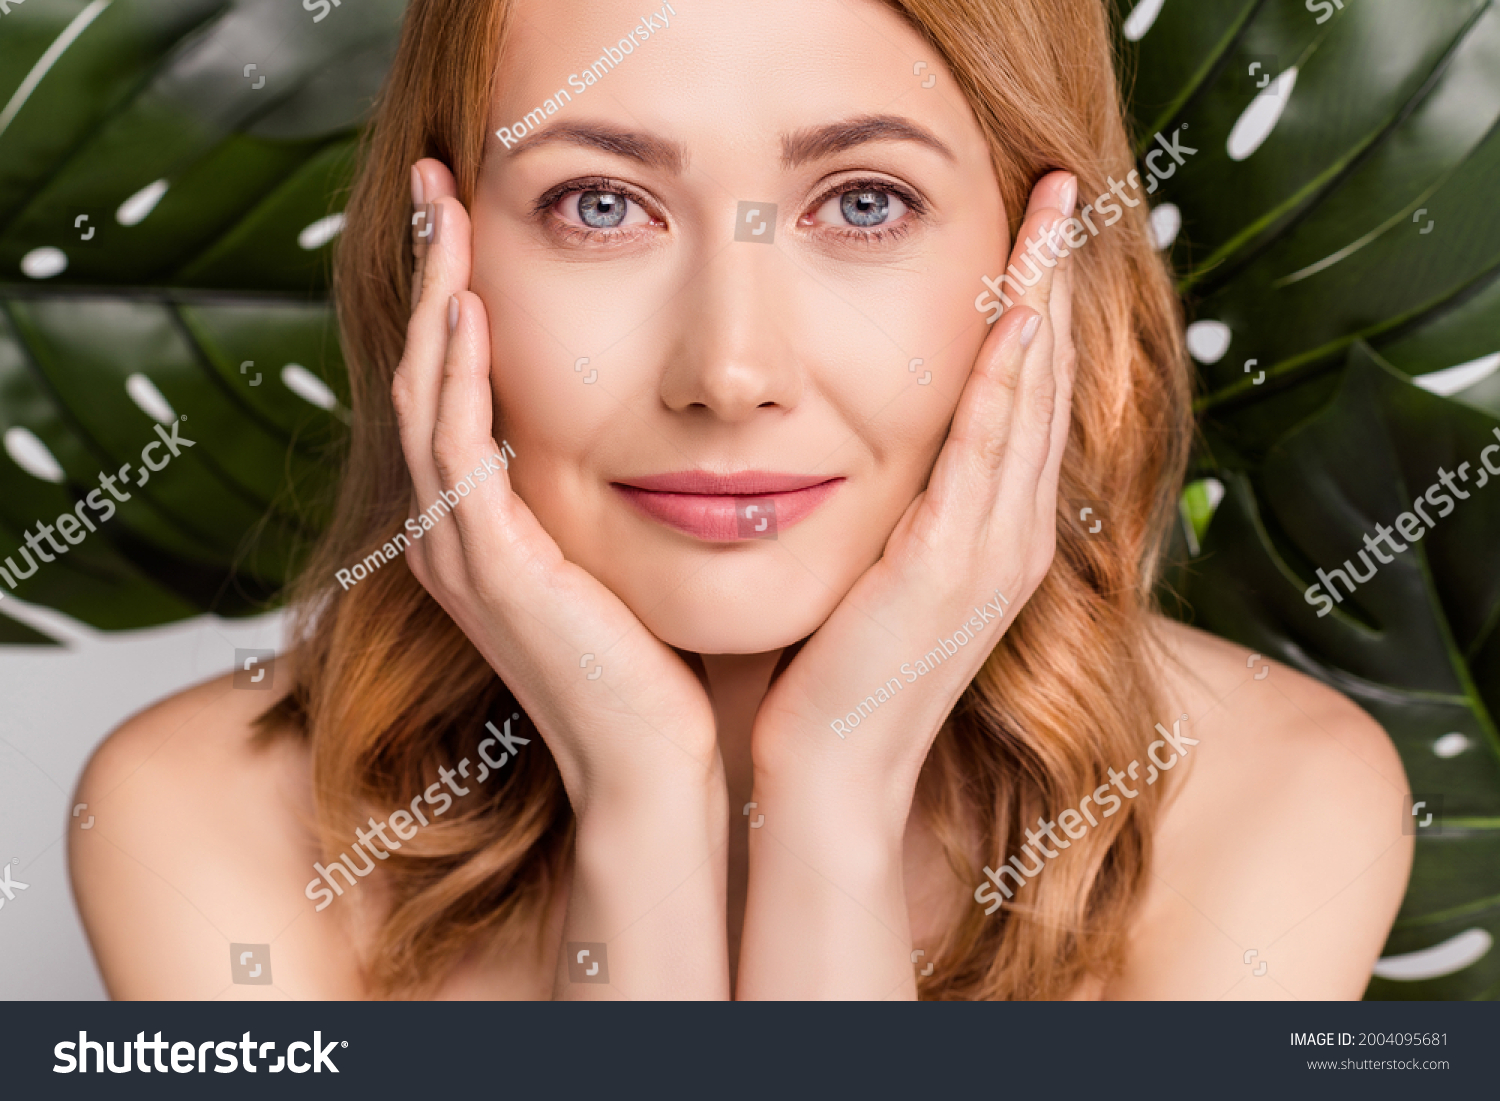 Cropped View Portrait Attractive Nude Woman Stock Photo Shutterstock